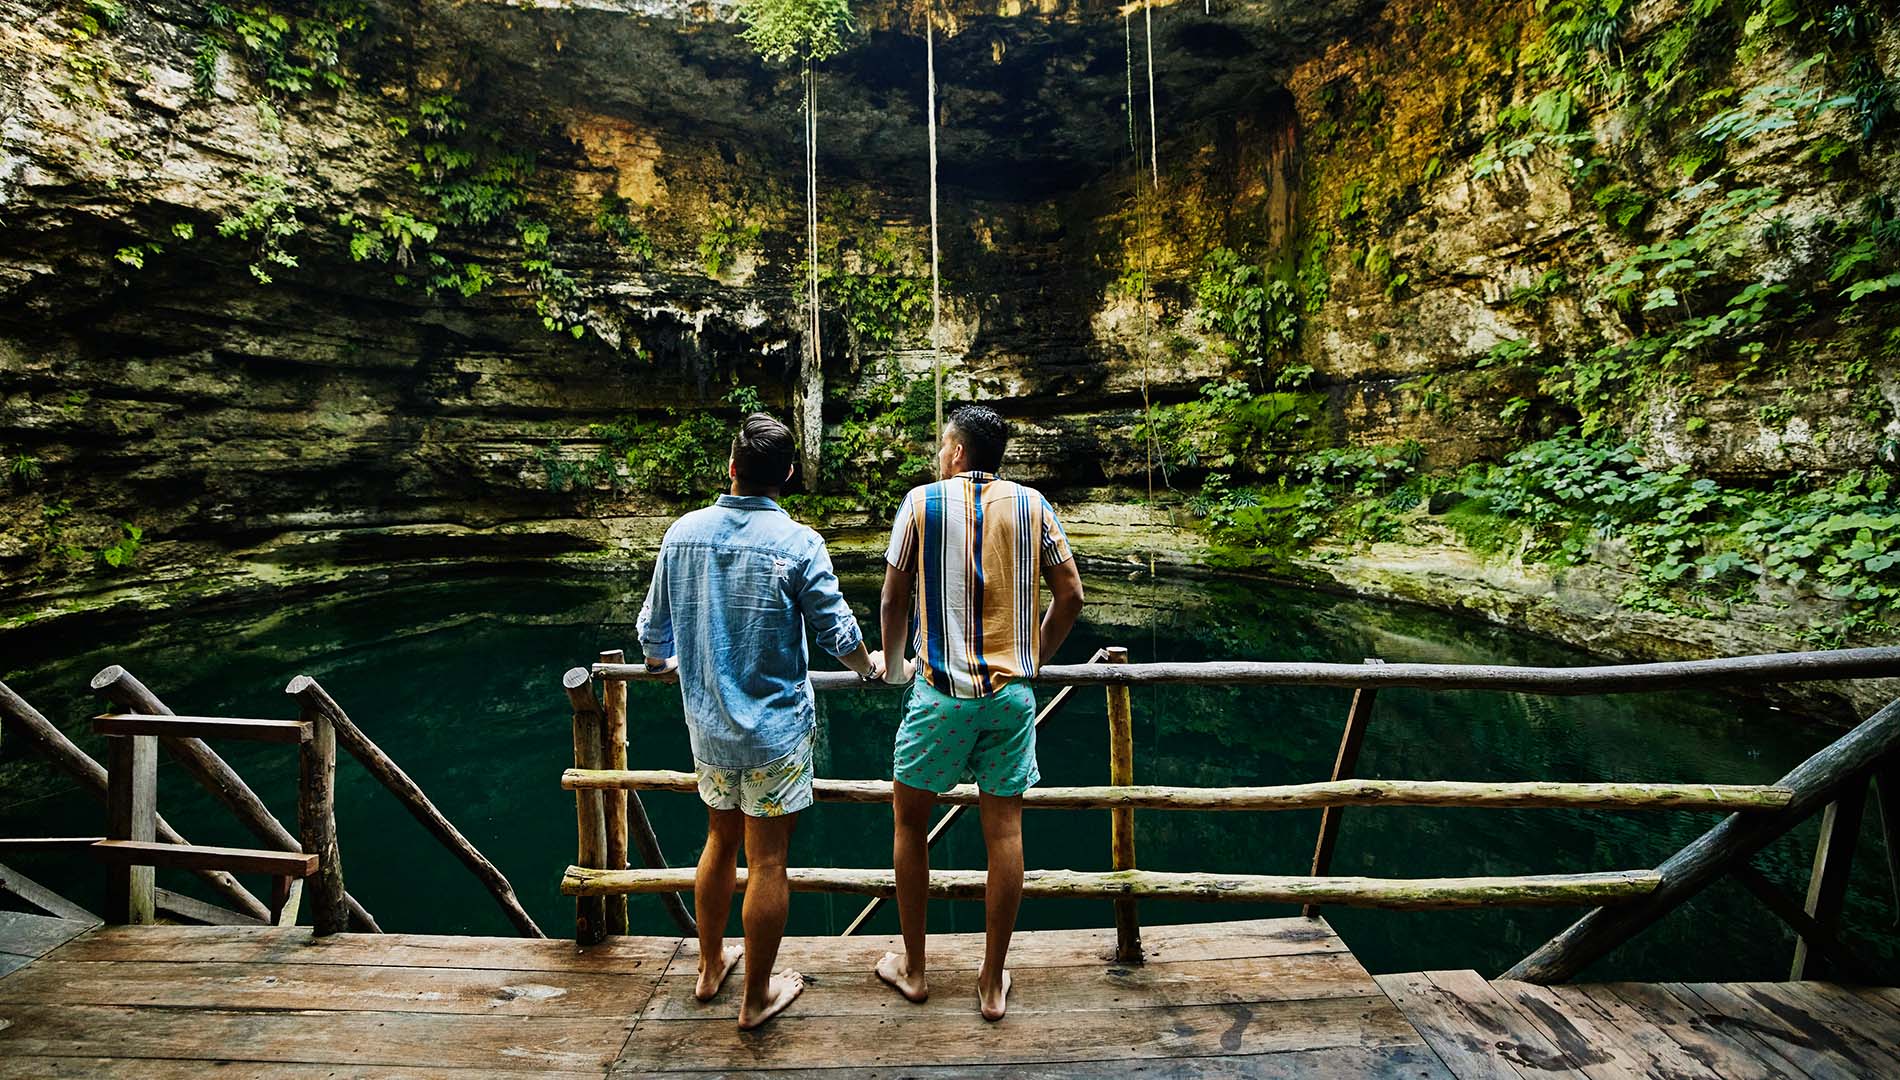 Two men look down at a cenote in Mexico